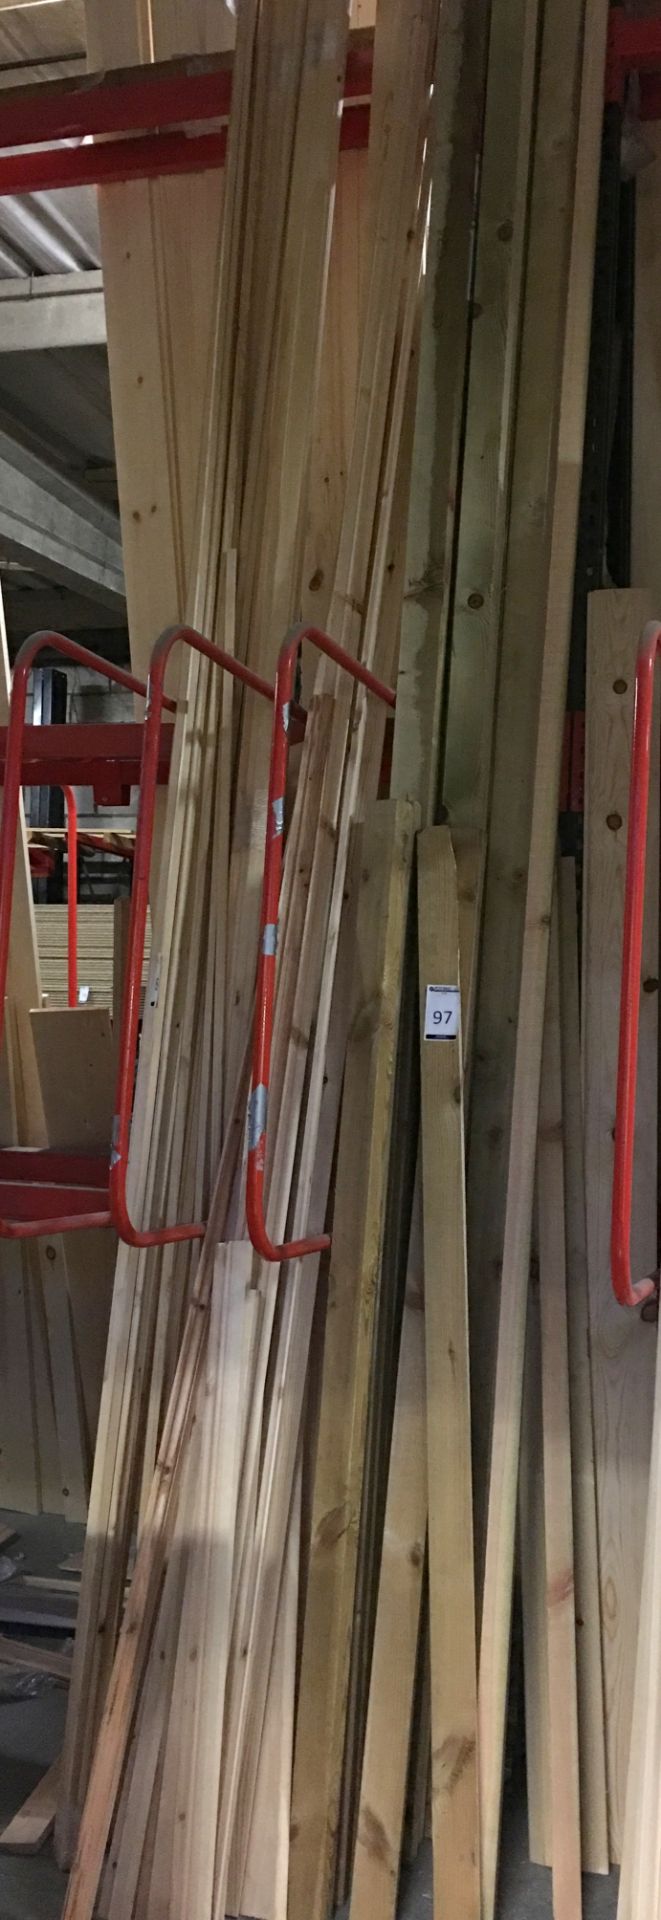 Softwood Lengths, Various Dimensions (Contents of Single Divider) (located at Tooting, viewing